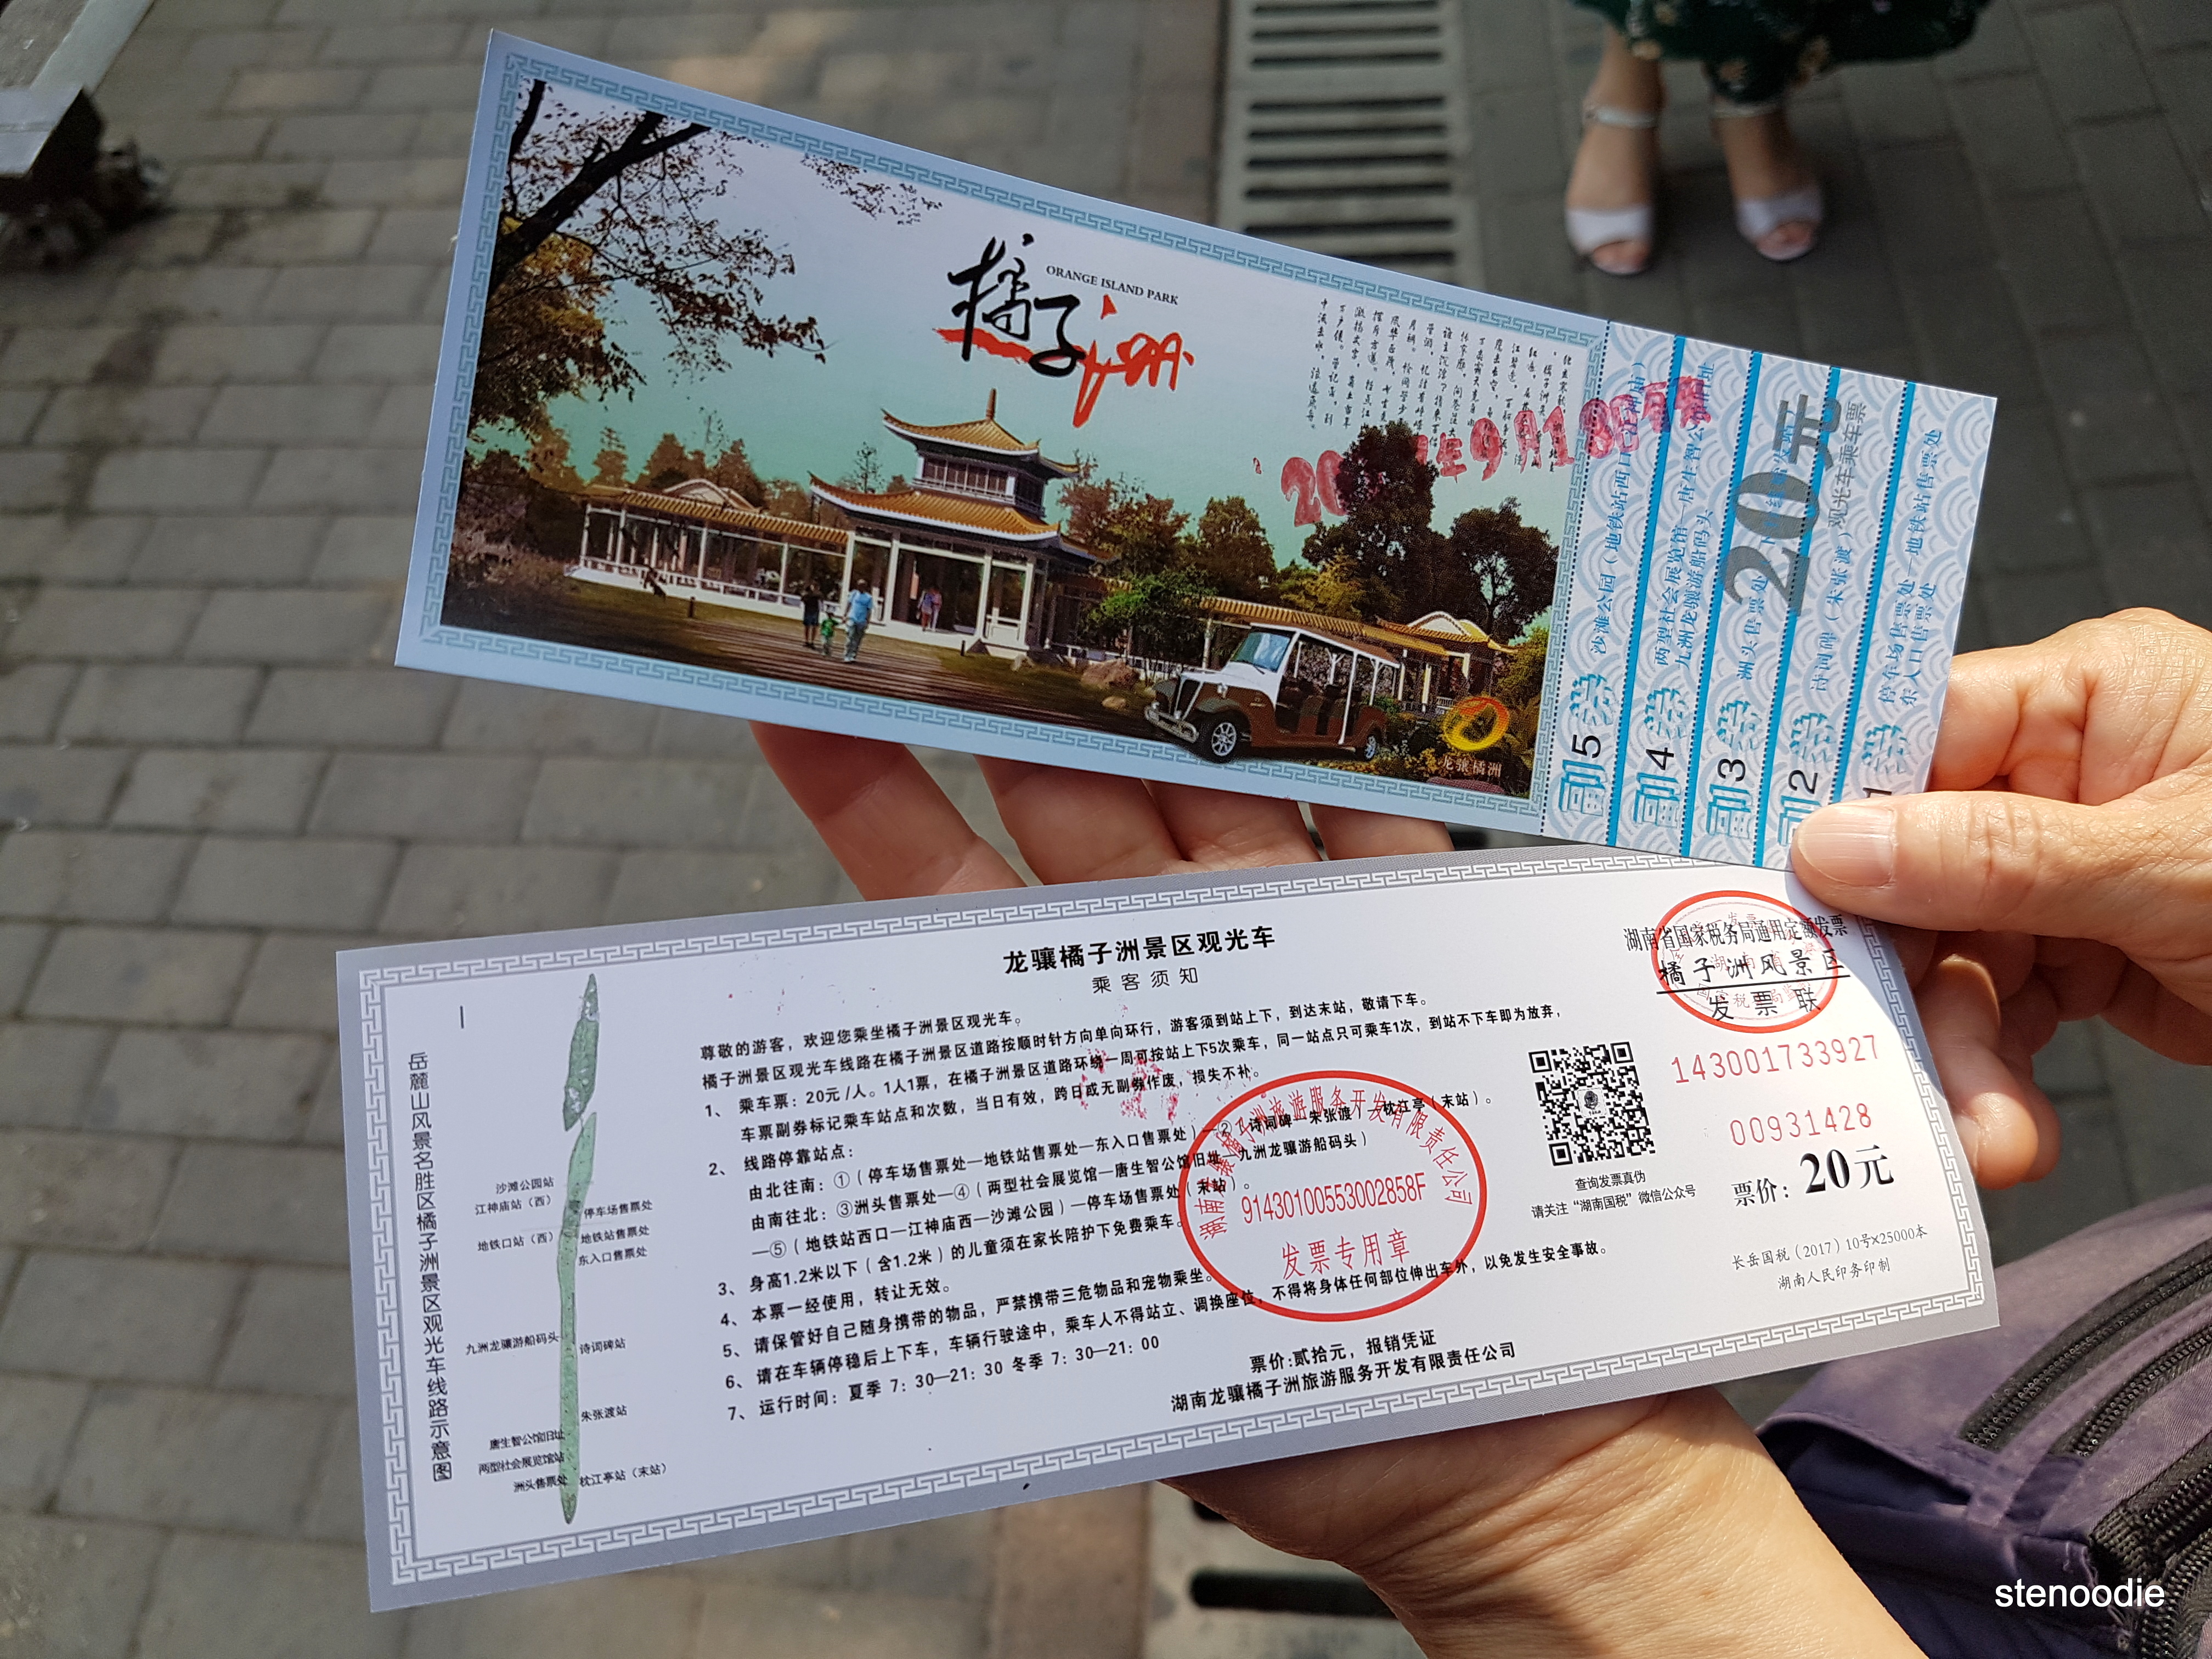  Tickets for the sightseeing bus